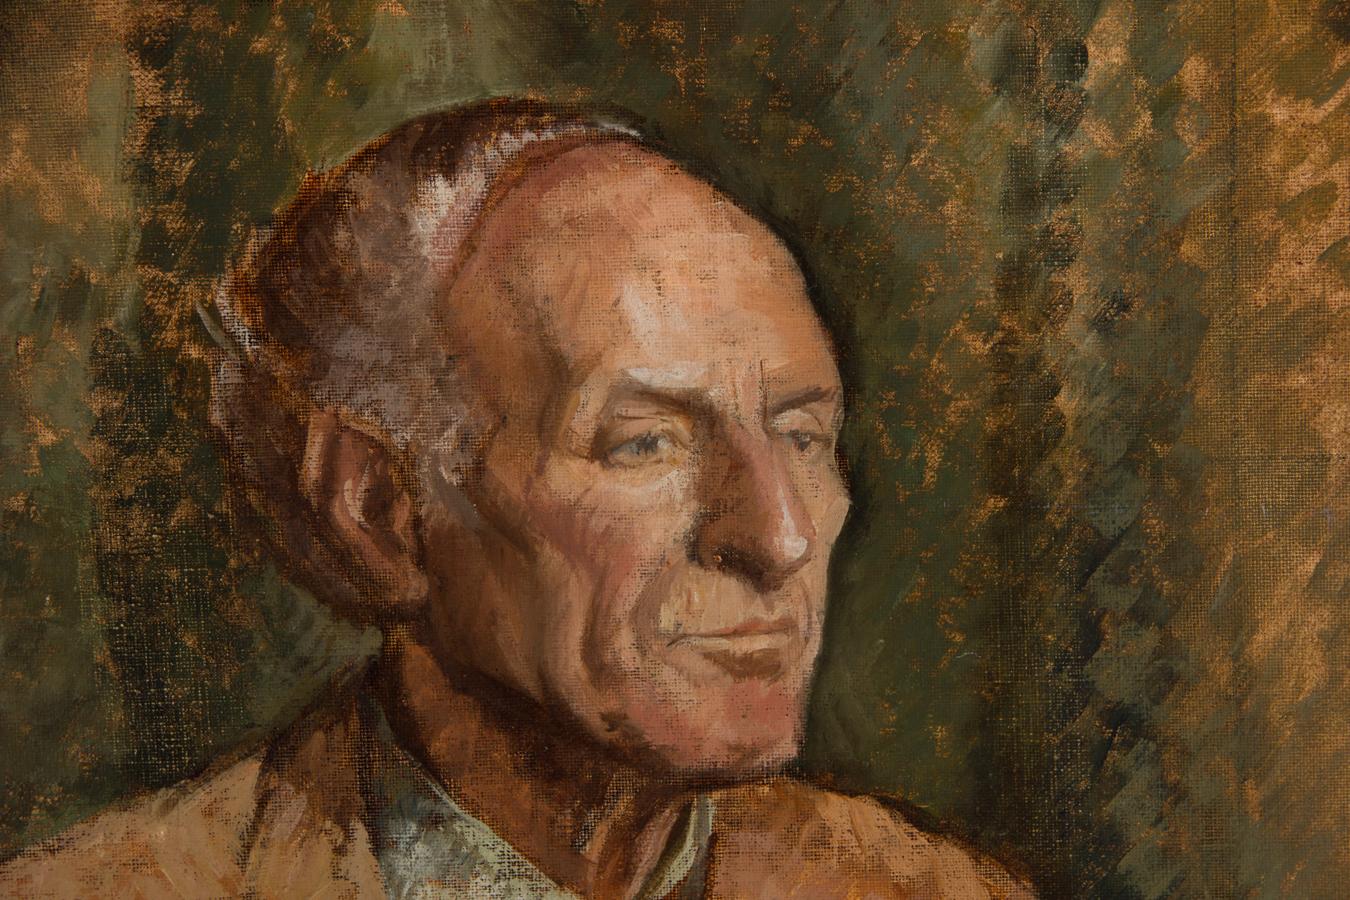 An impressive portrait showing a older gentleman with a rather ponderous facial expression. The soft brushstokes and bold colour palette beautifully captures the essence of this serious sitter. Attentive to the conventions of realism the artist has